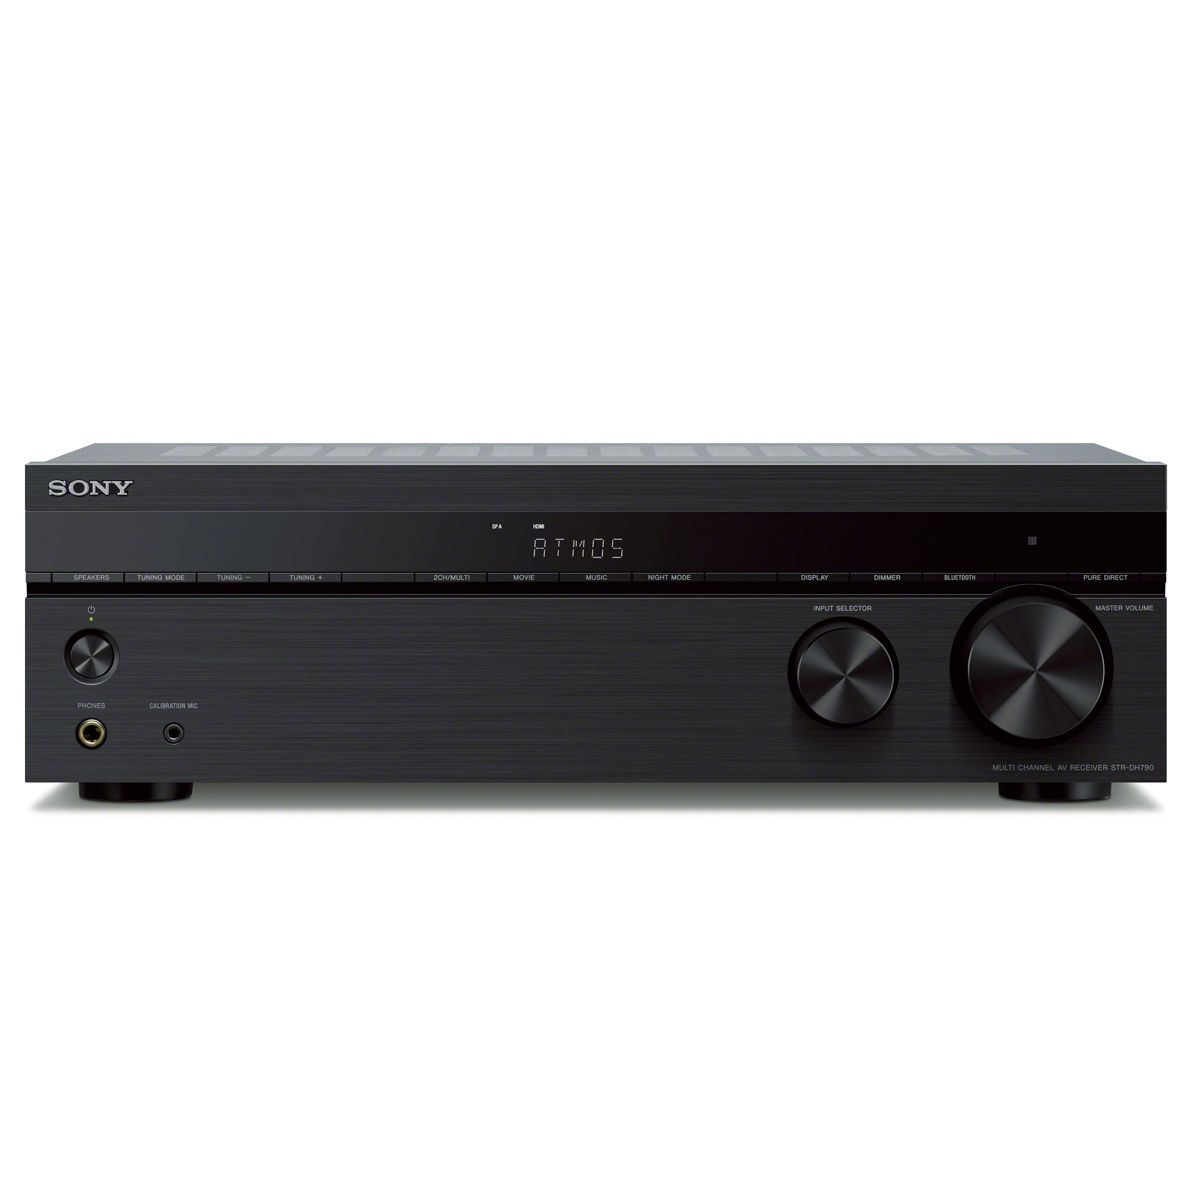 Sony STR-DH790 7.2 Channel Home Theater AV Receiver - Front view